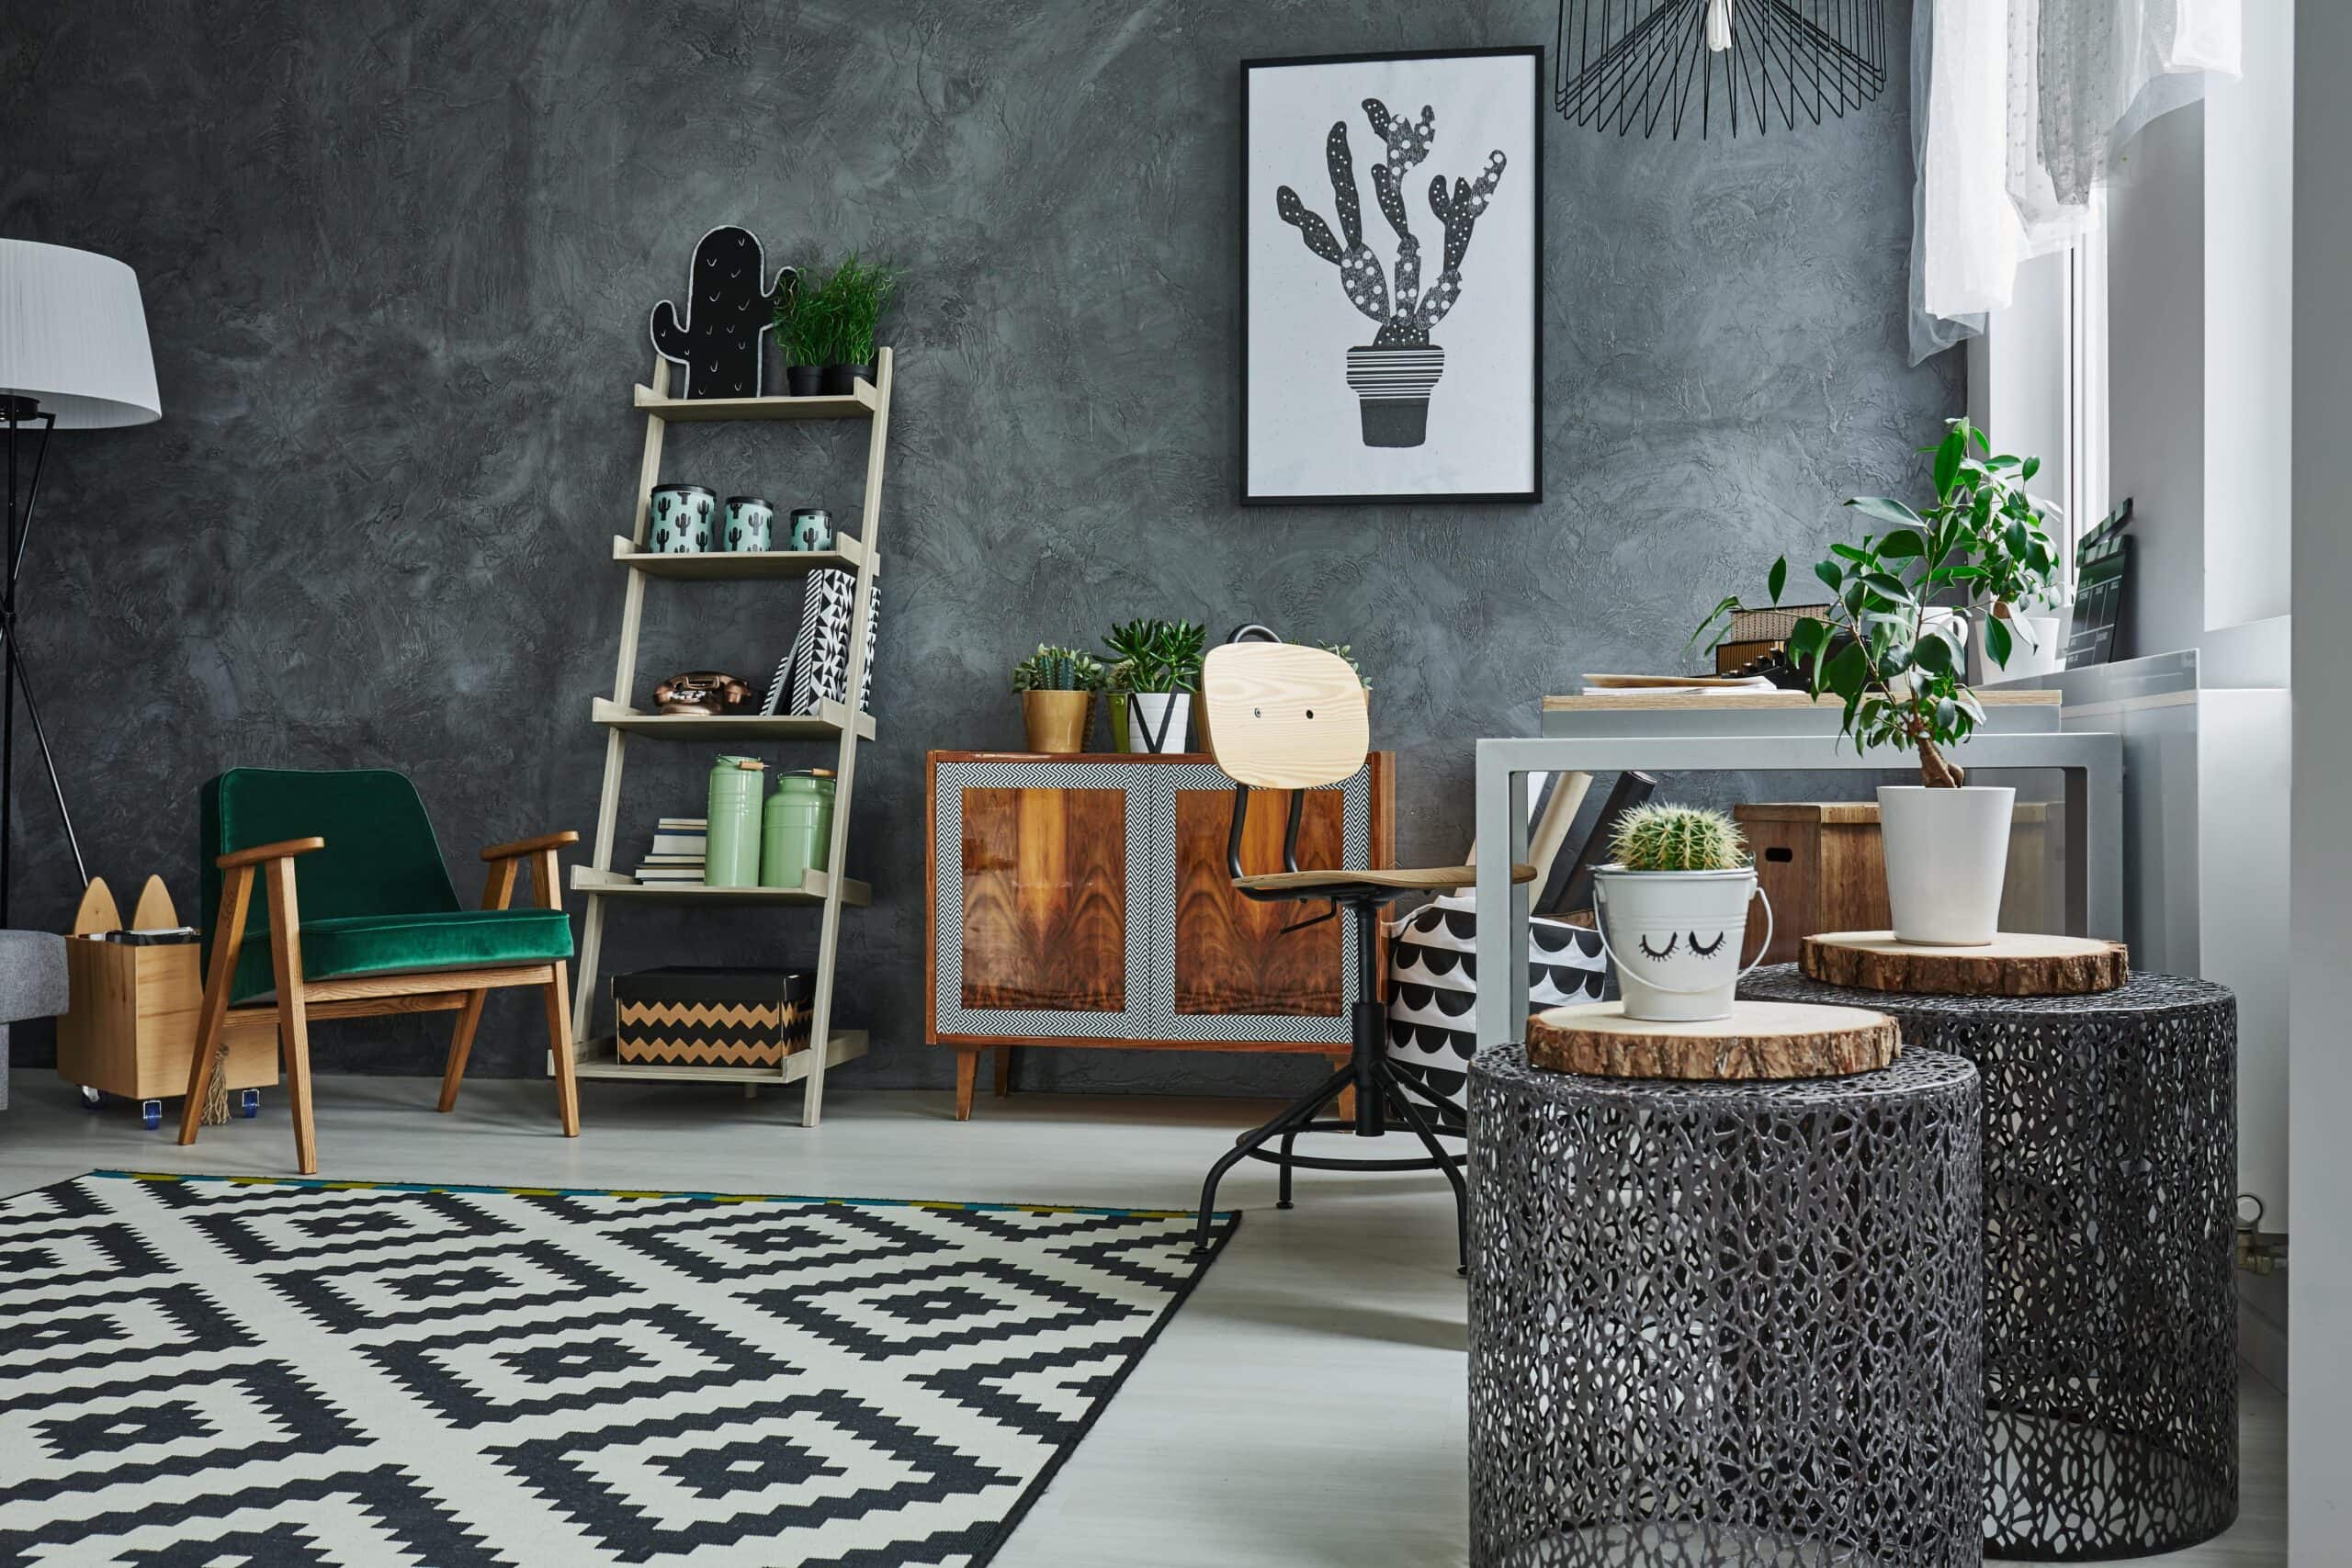 5 Top Home Decor Trends For 2021 The Decor Journal India